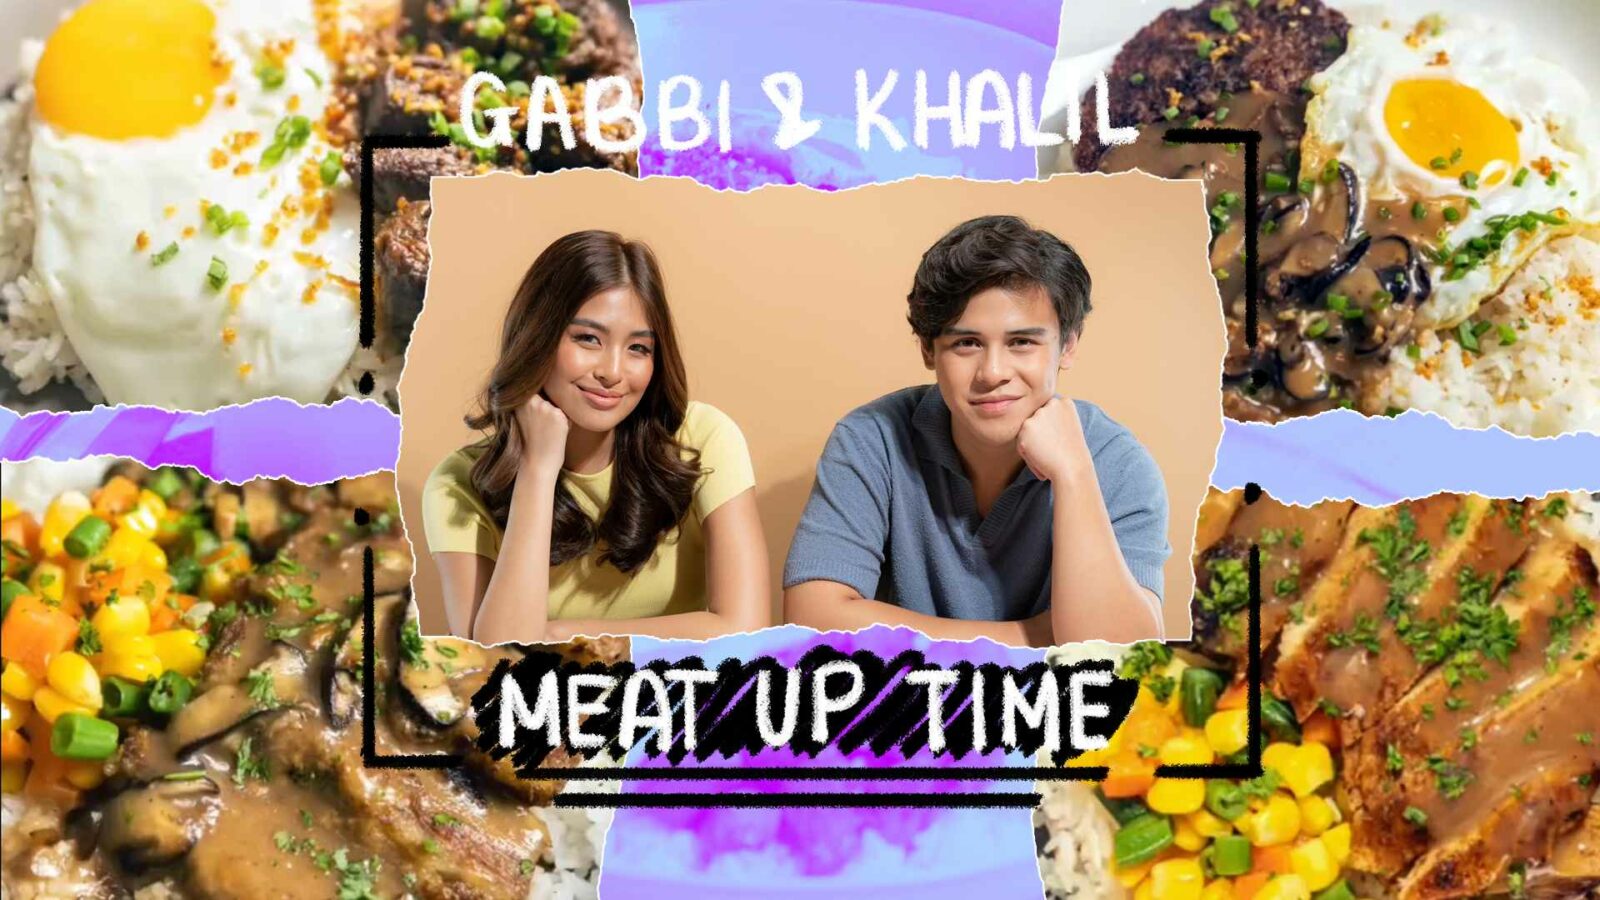 Gabbi Garcia And Khalil Ramos’s New Food Business Is Made For And By Steak Lovers